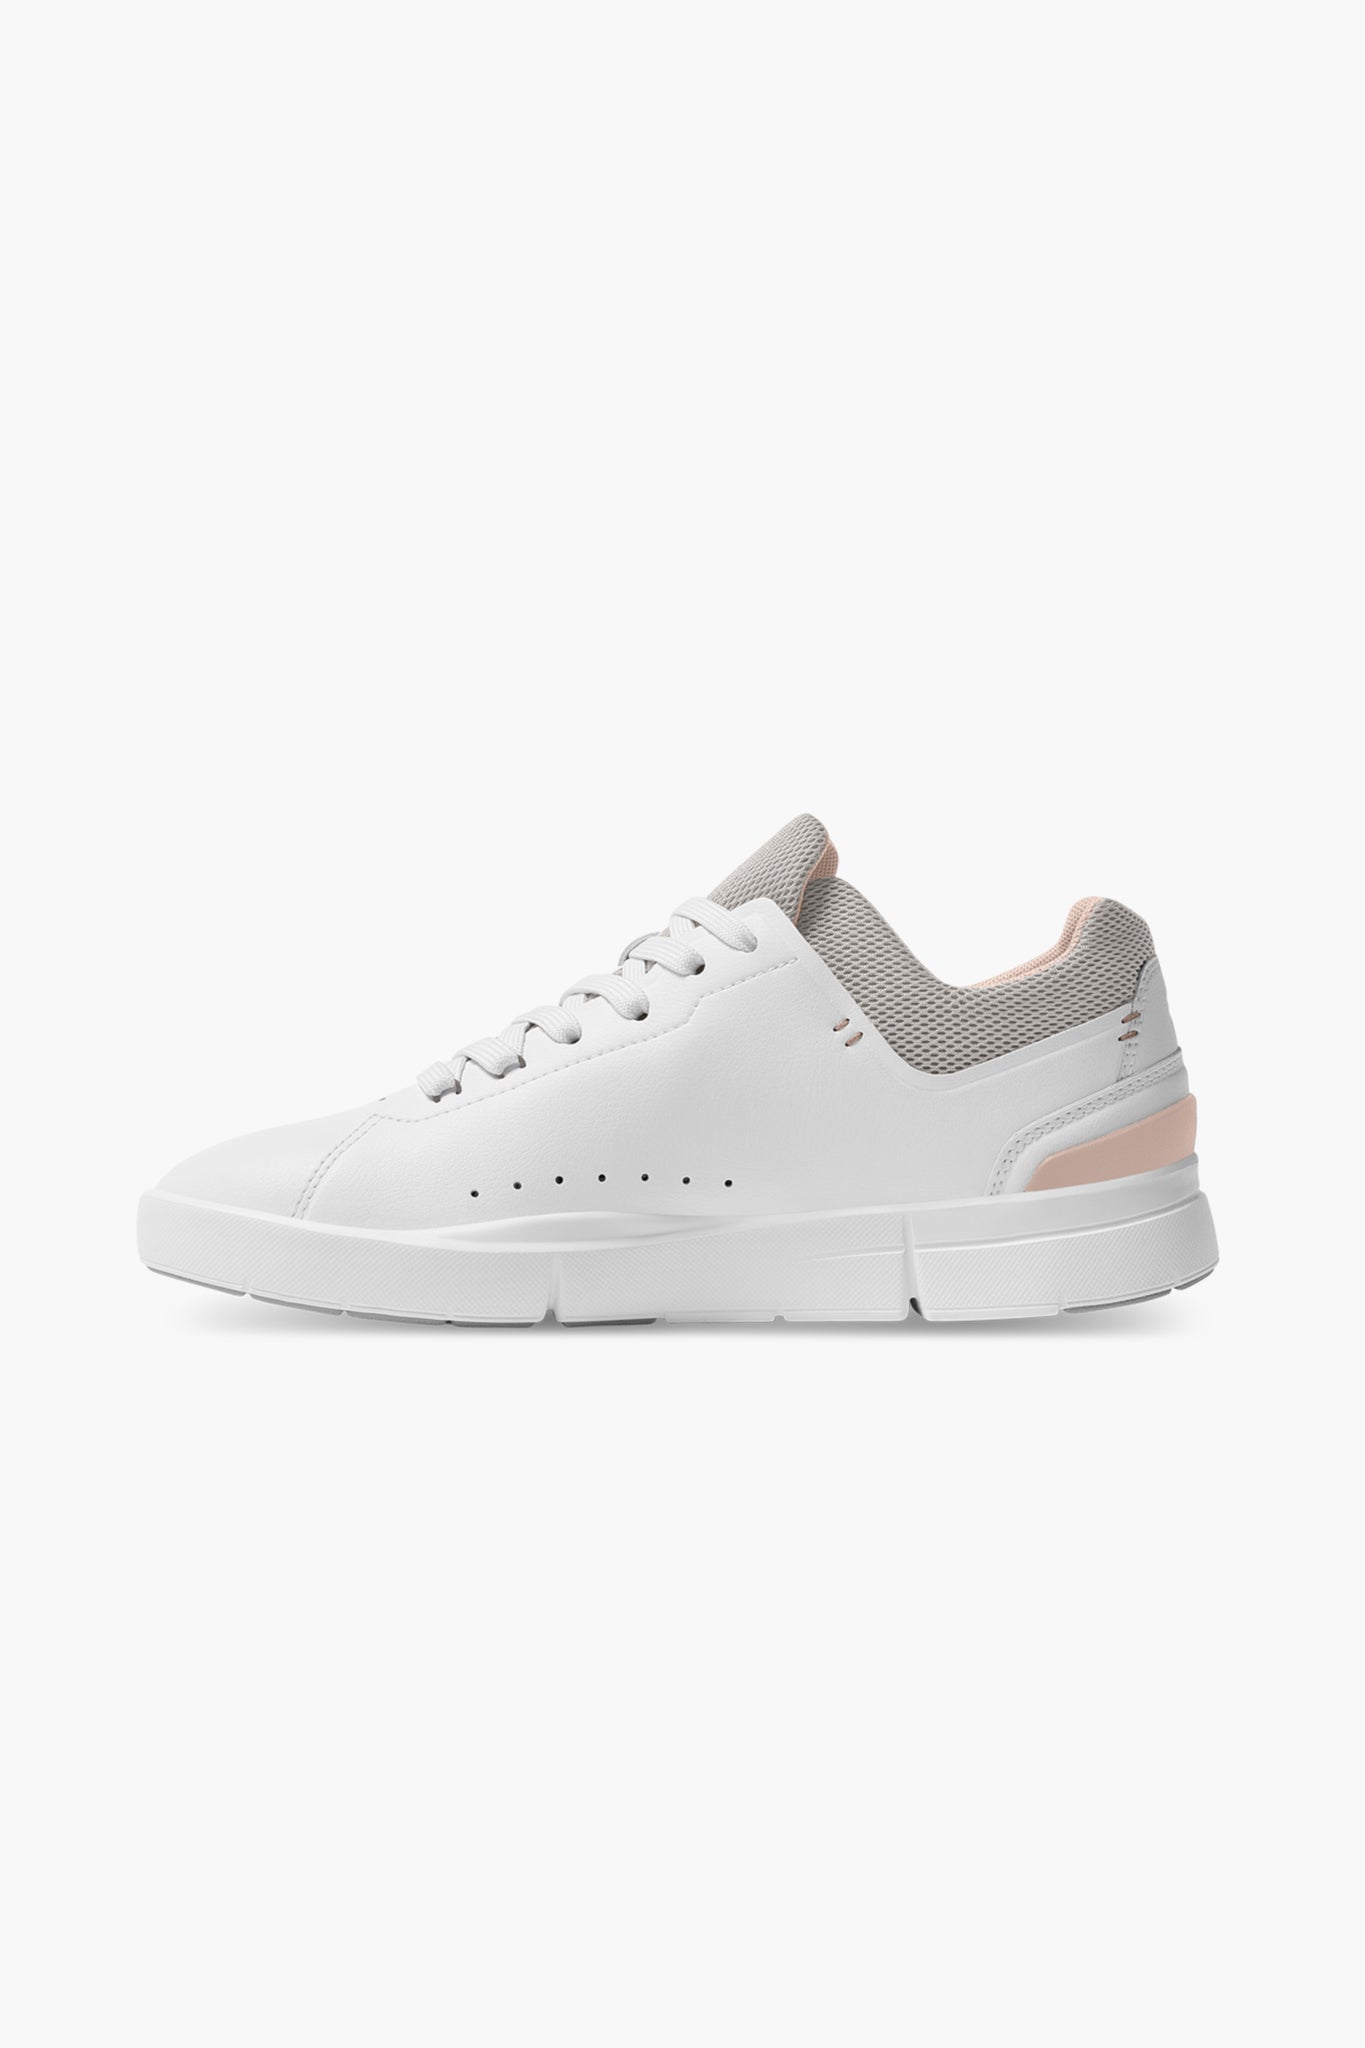 ON | Women's The Roger Advantage in White/Rose